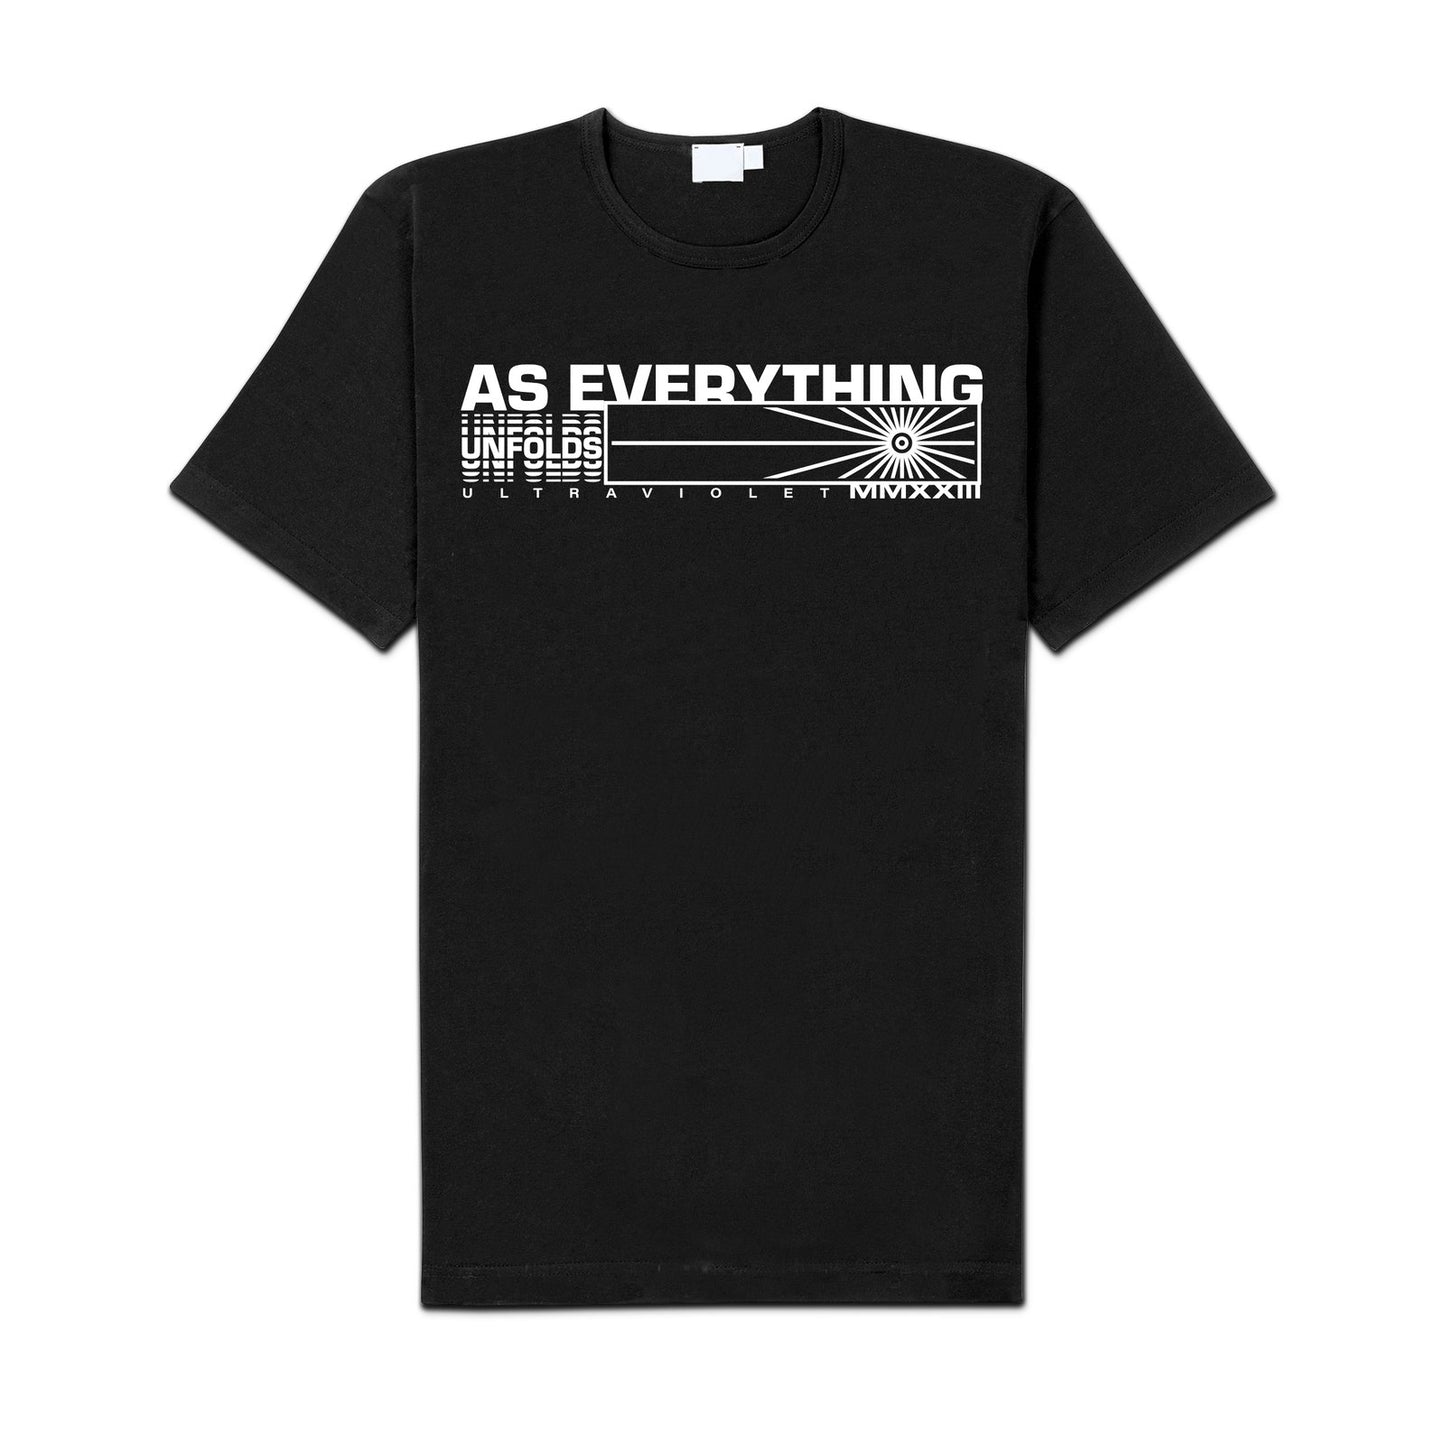 As Everything Unfolds "MMXXIII" Shirt